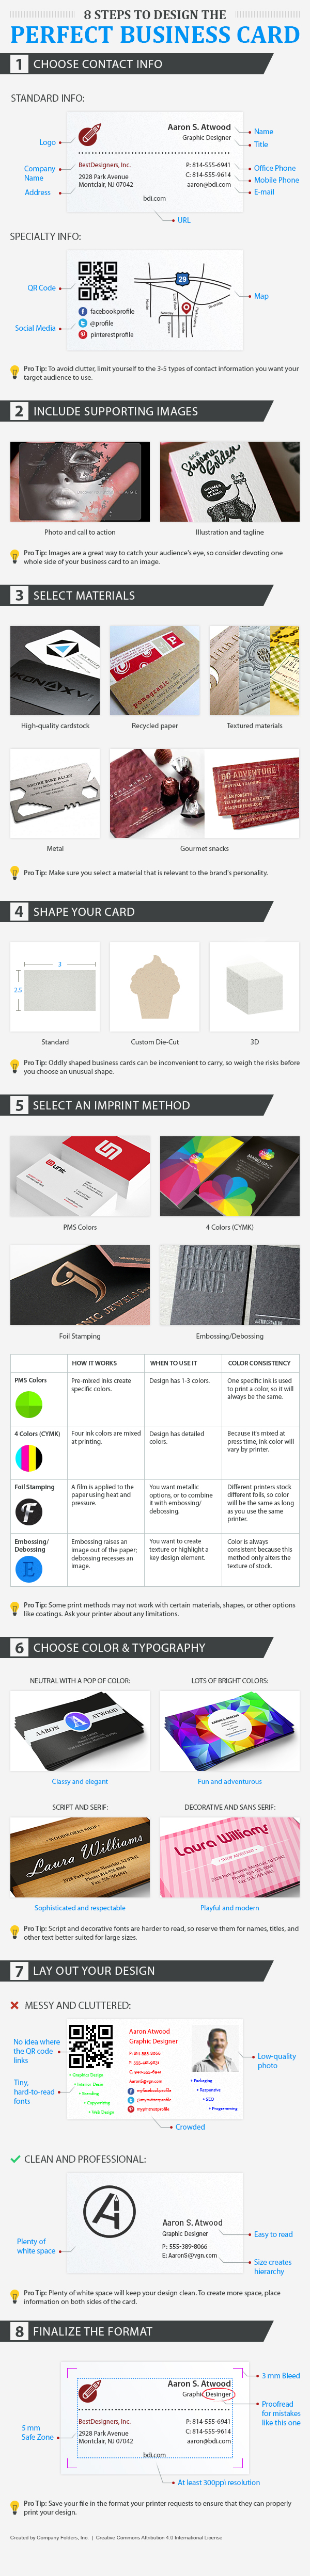 8 Tips to Design the Perfect Business Card